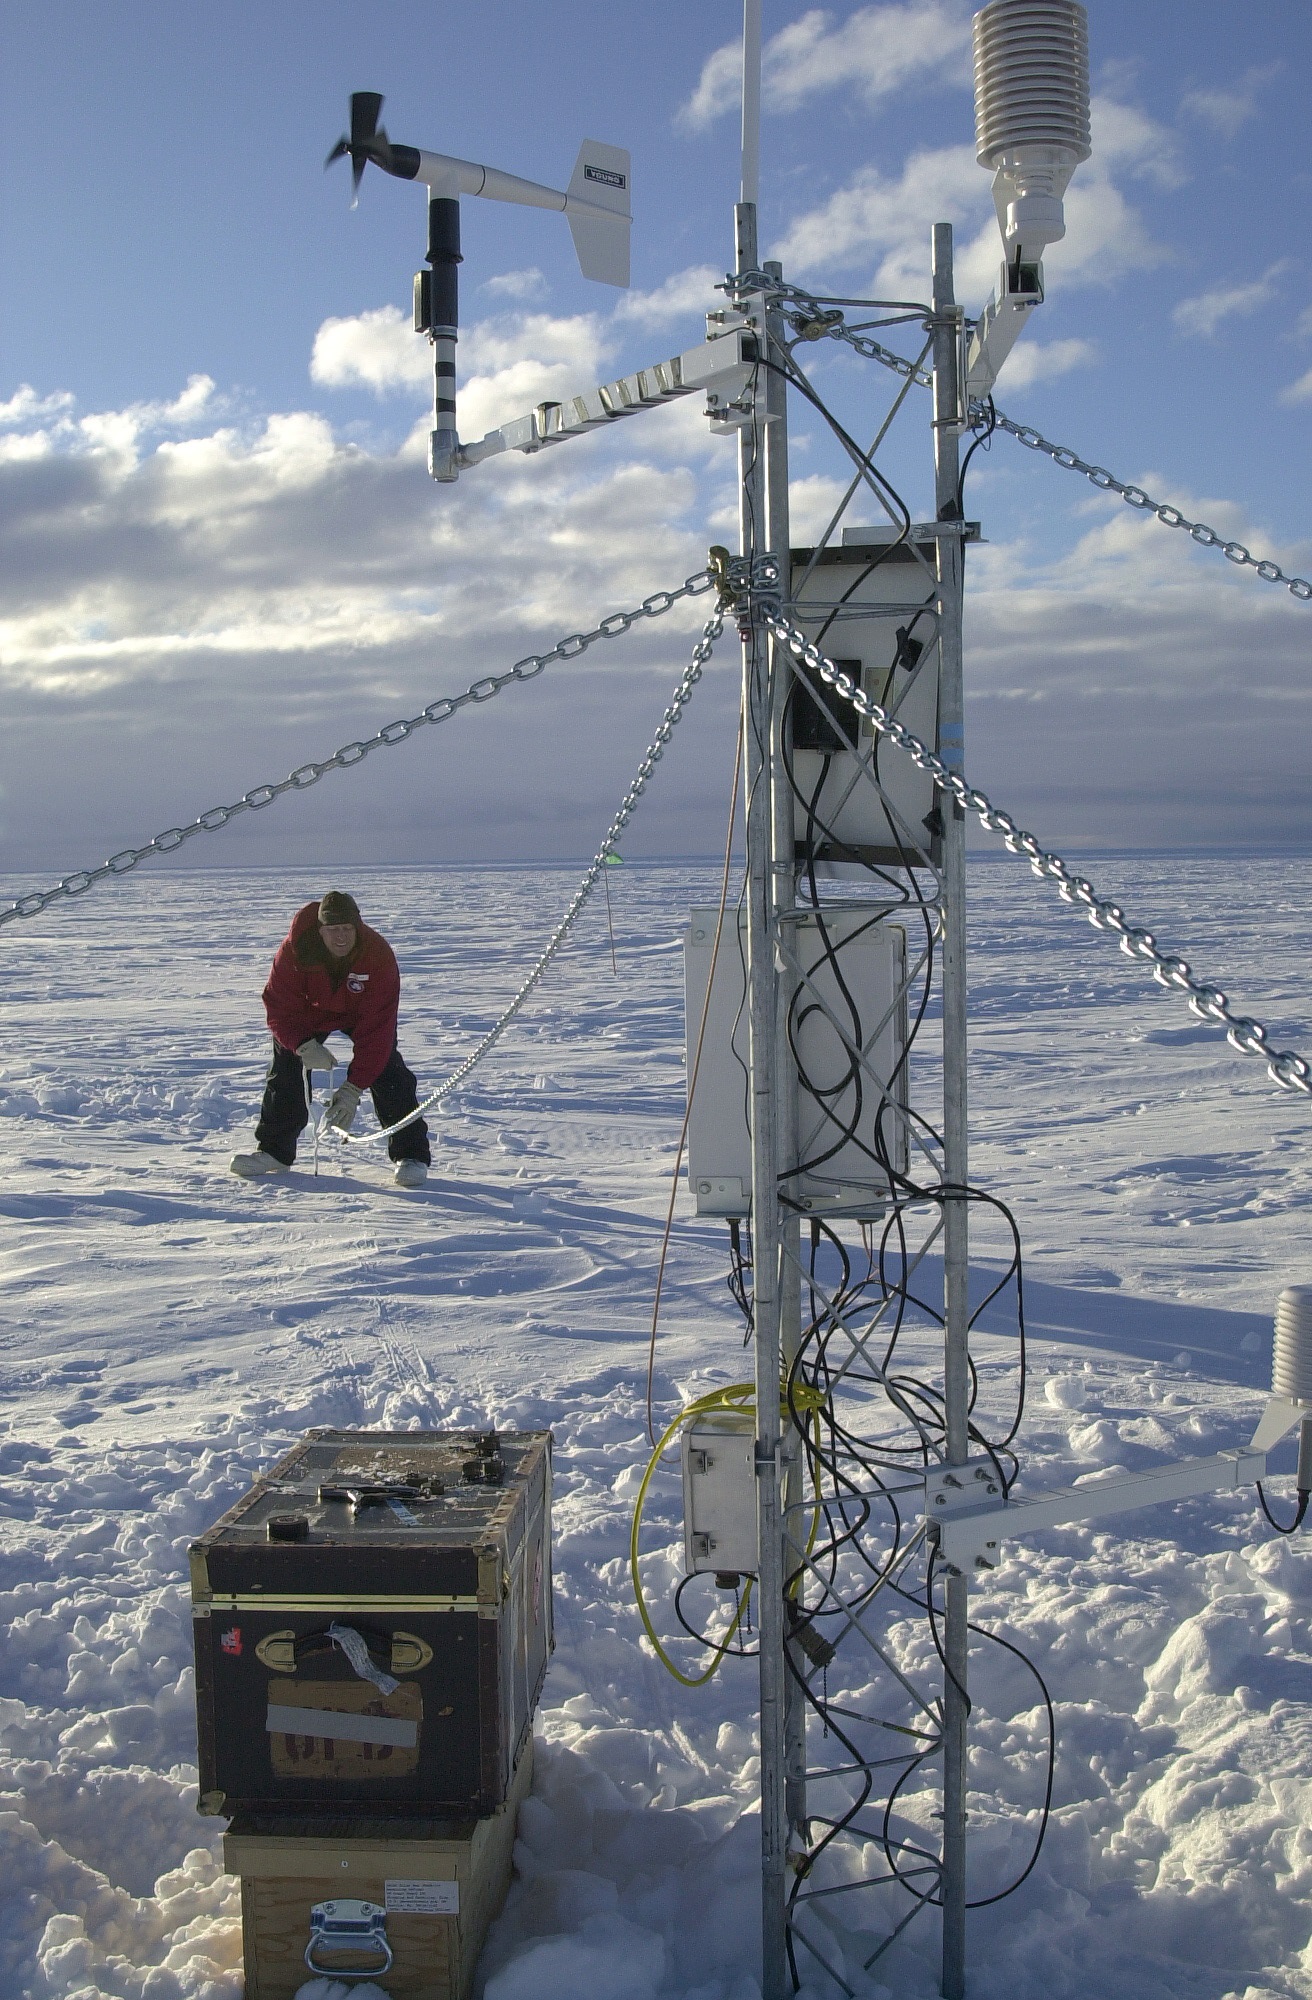 Remote sites require connectivity like NSF's Polar Programs